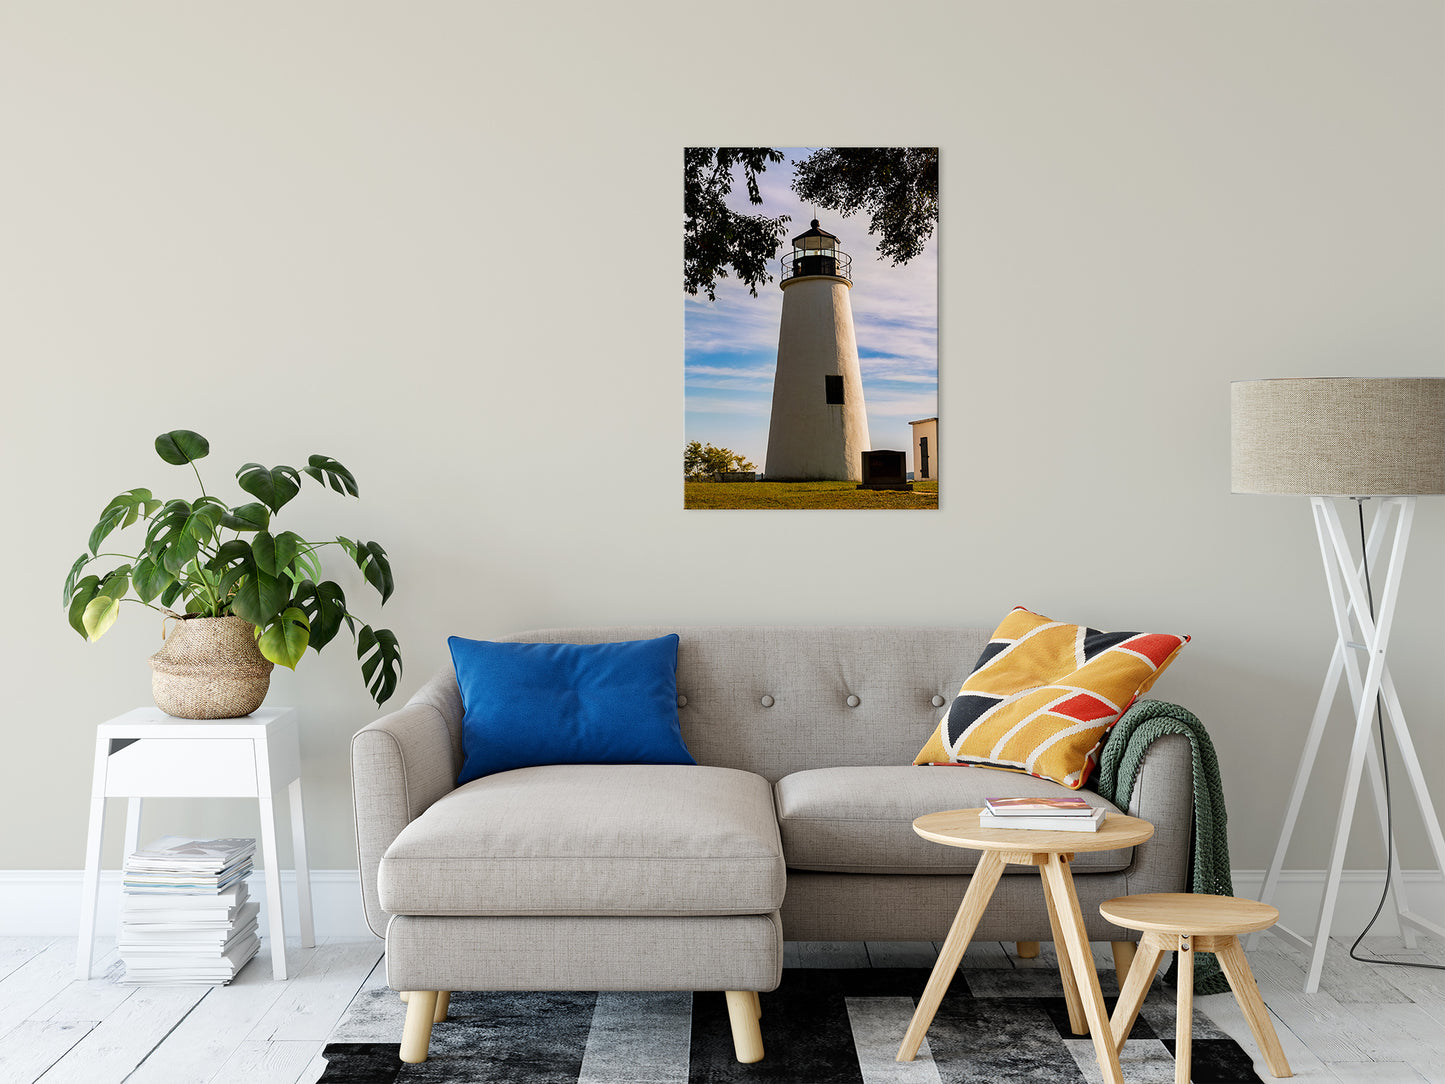 Turkey Point Lighthouse in the Trees Landscape Fine Art Canvas Wall Art Prints 24" x 36" - PIPAFINEART